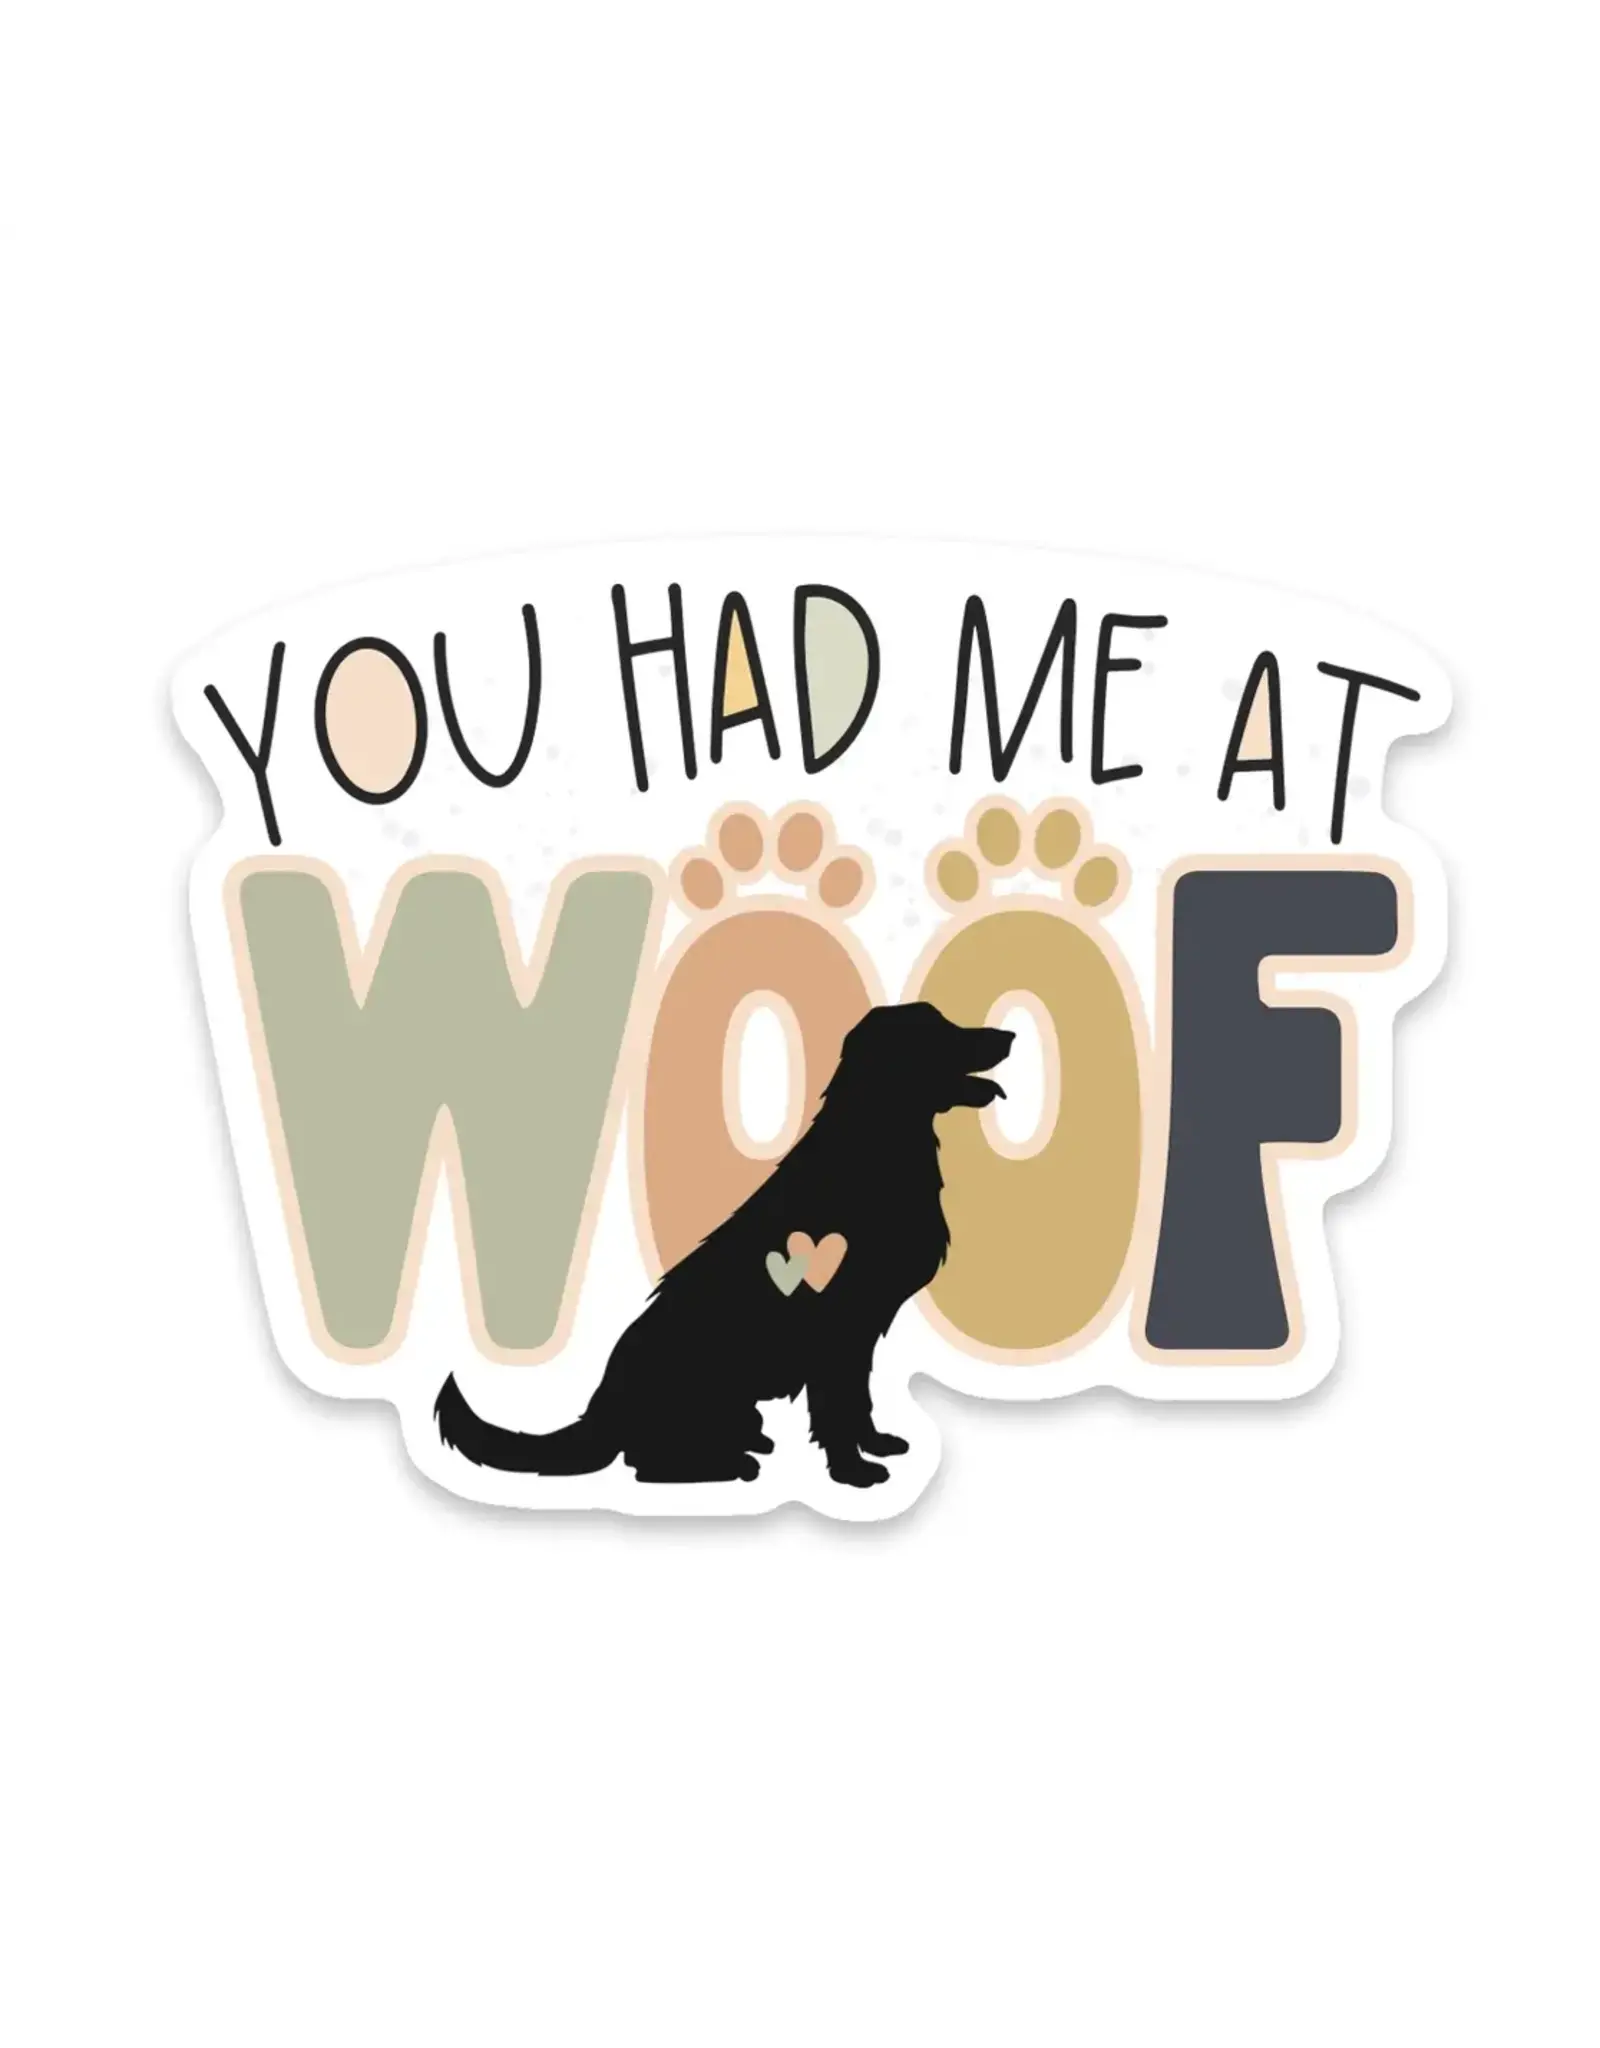 SCENIC ROUTE NOVELTY STICKER HAD ME AT WOOF